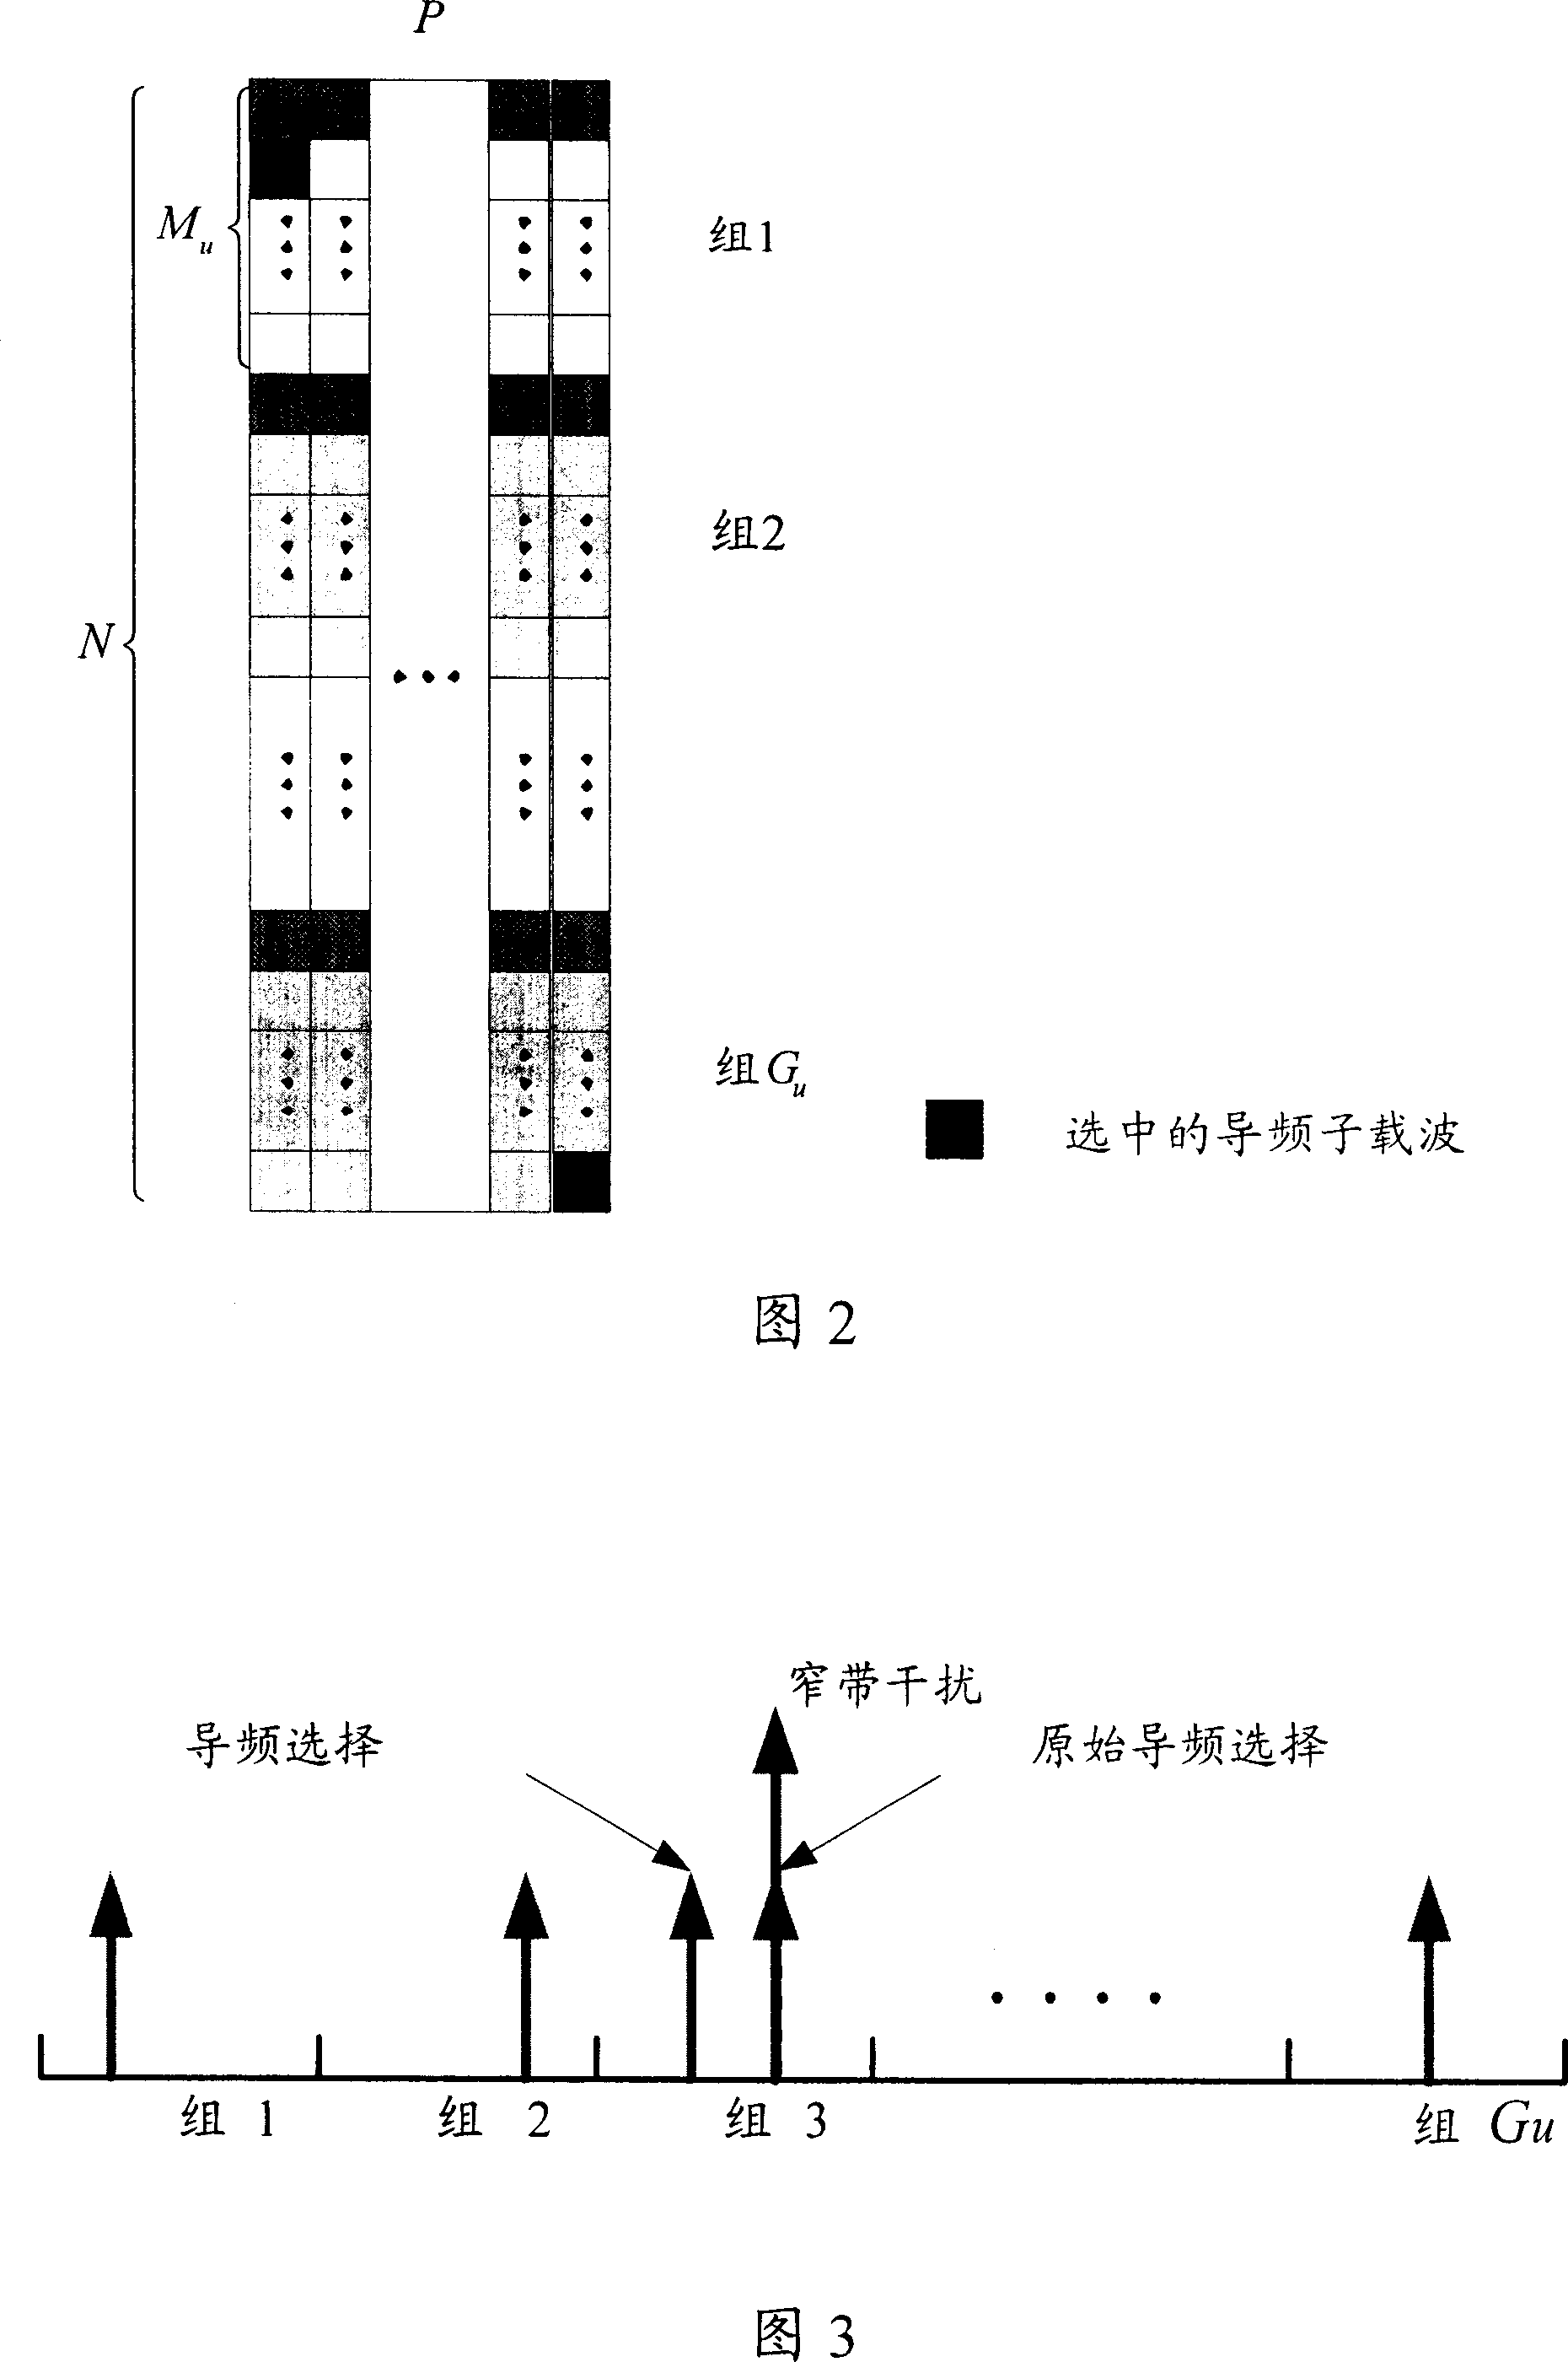 Pilot frequency sub carrier grouping method in orthogonal frequency division multiple access system